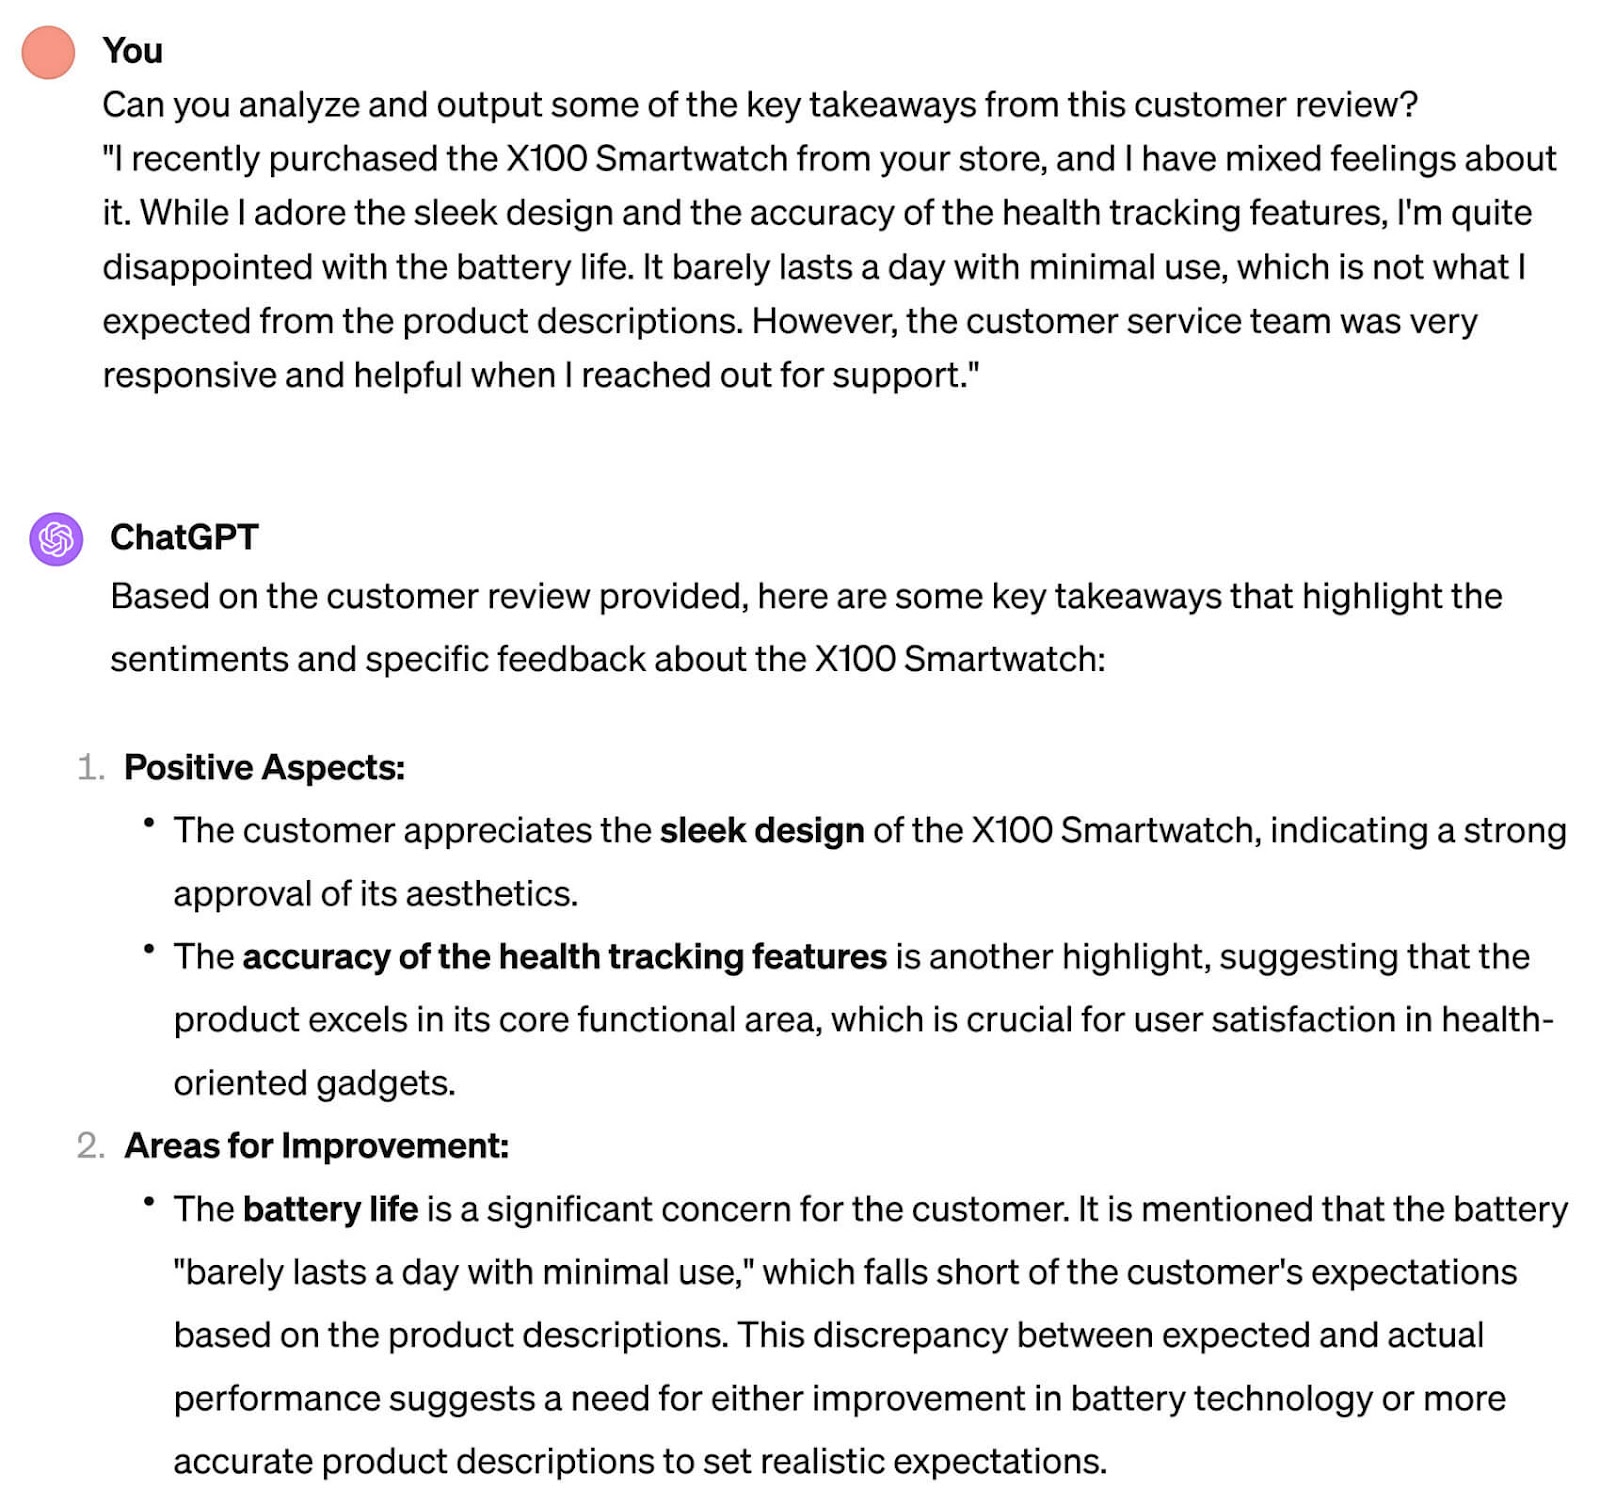 A prompt asking ChatGPT to analyze a given customer review